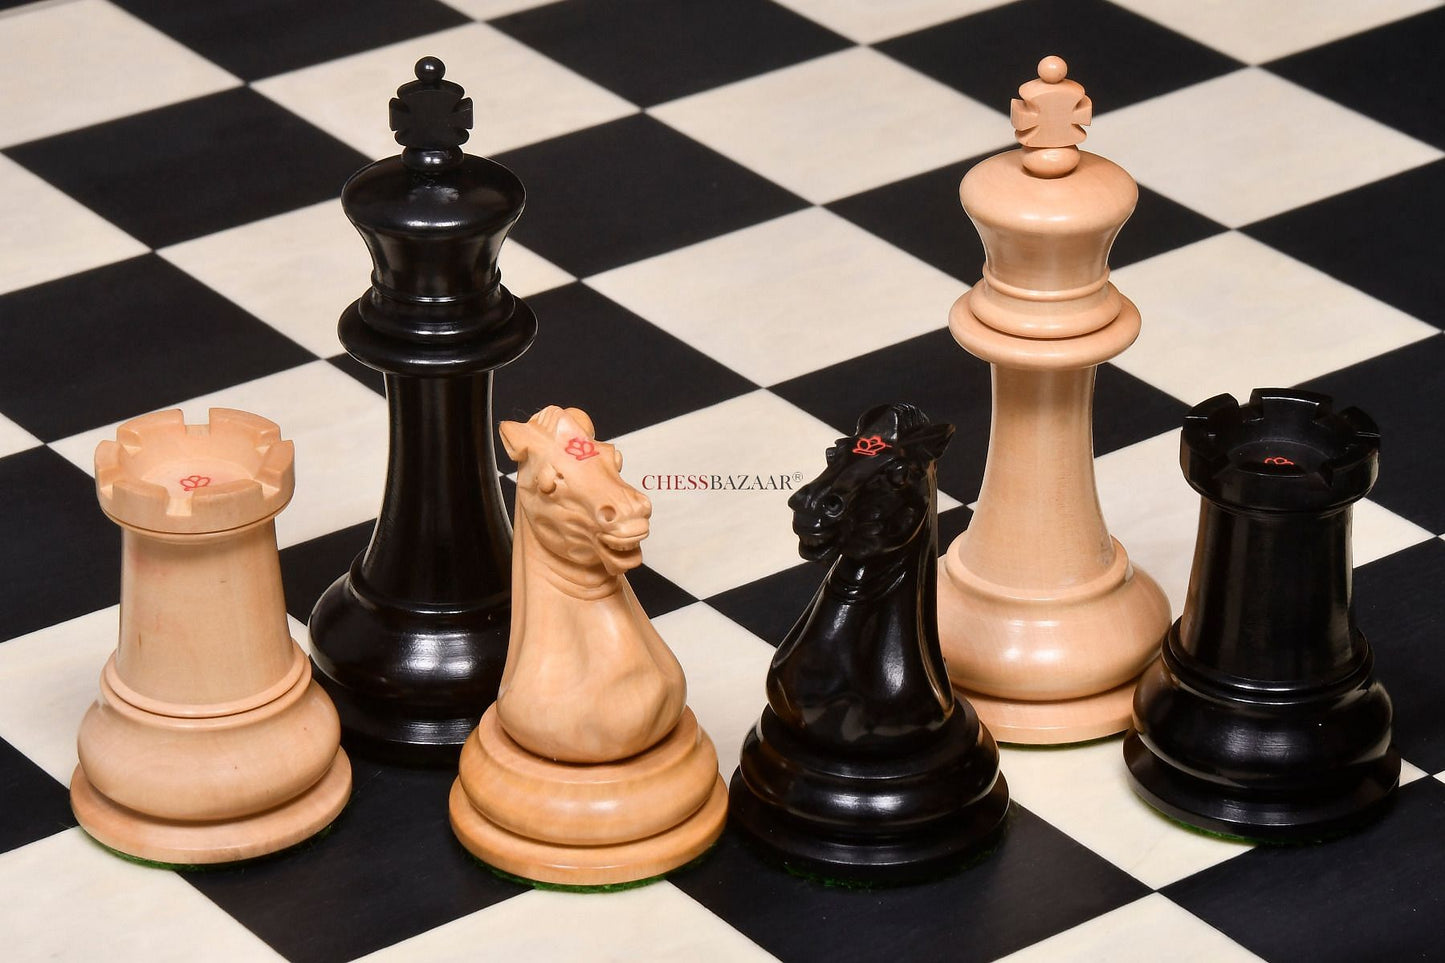 Reproduced 1849 Original Staunton Pattern Wooden Heavy Chess Pieces in Ebony / Boxwood with King Side Stamping - 3.75" King